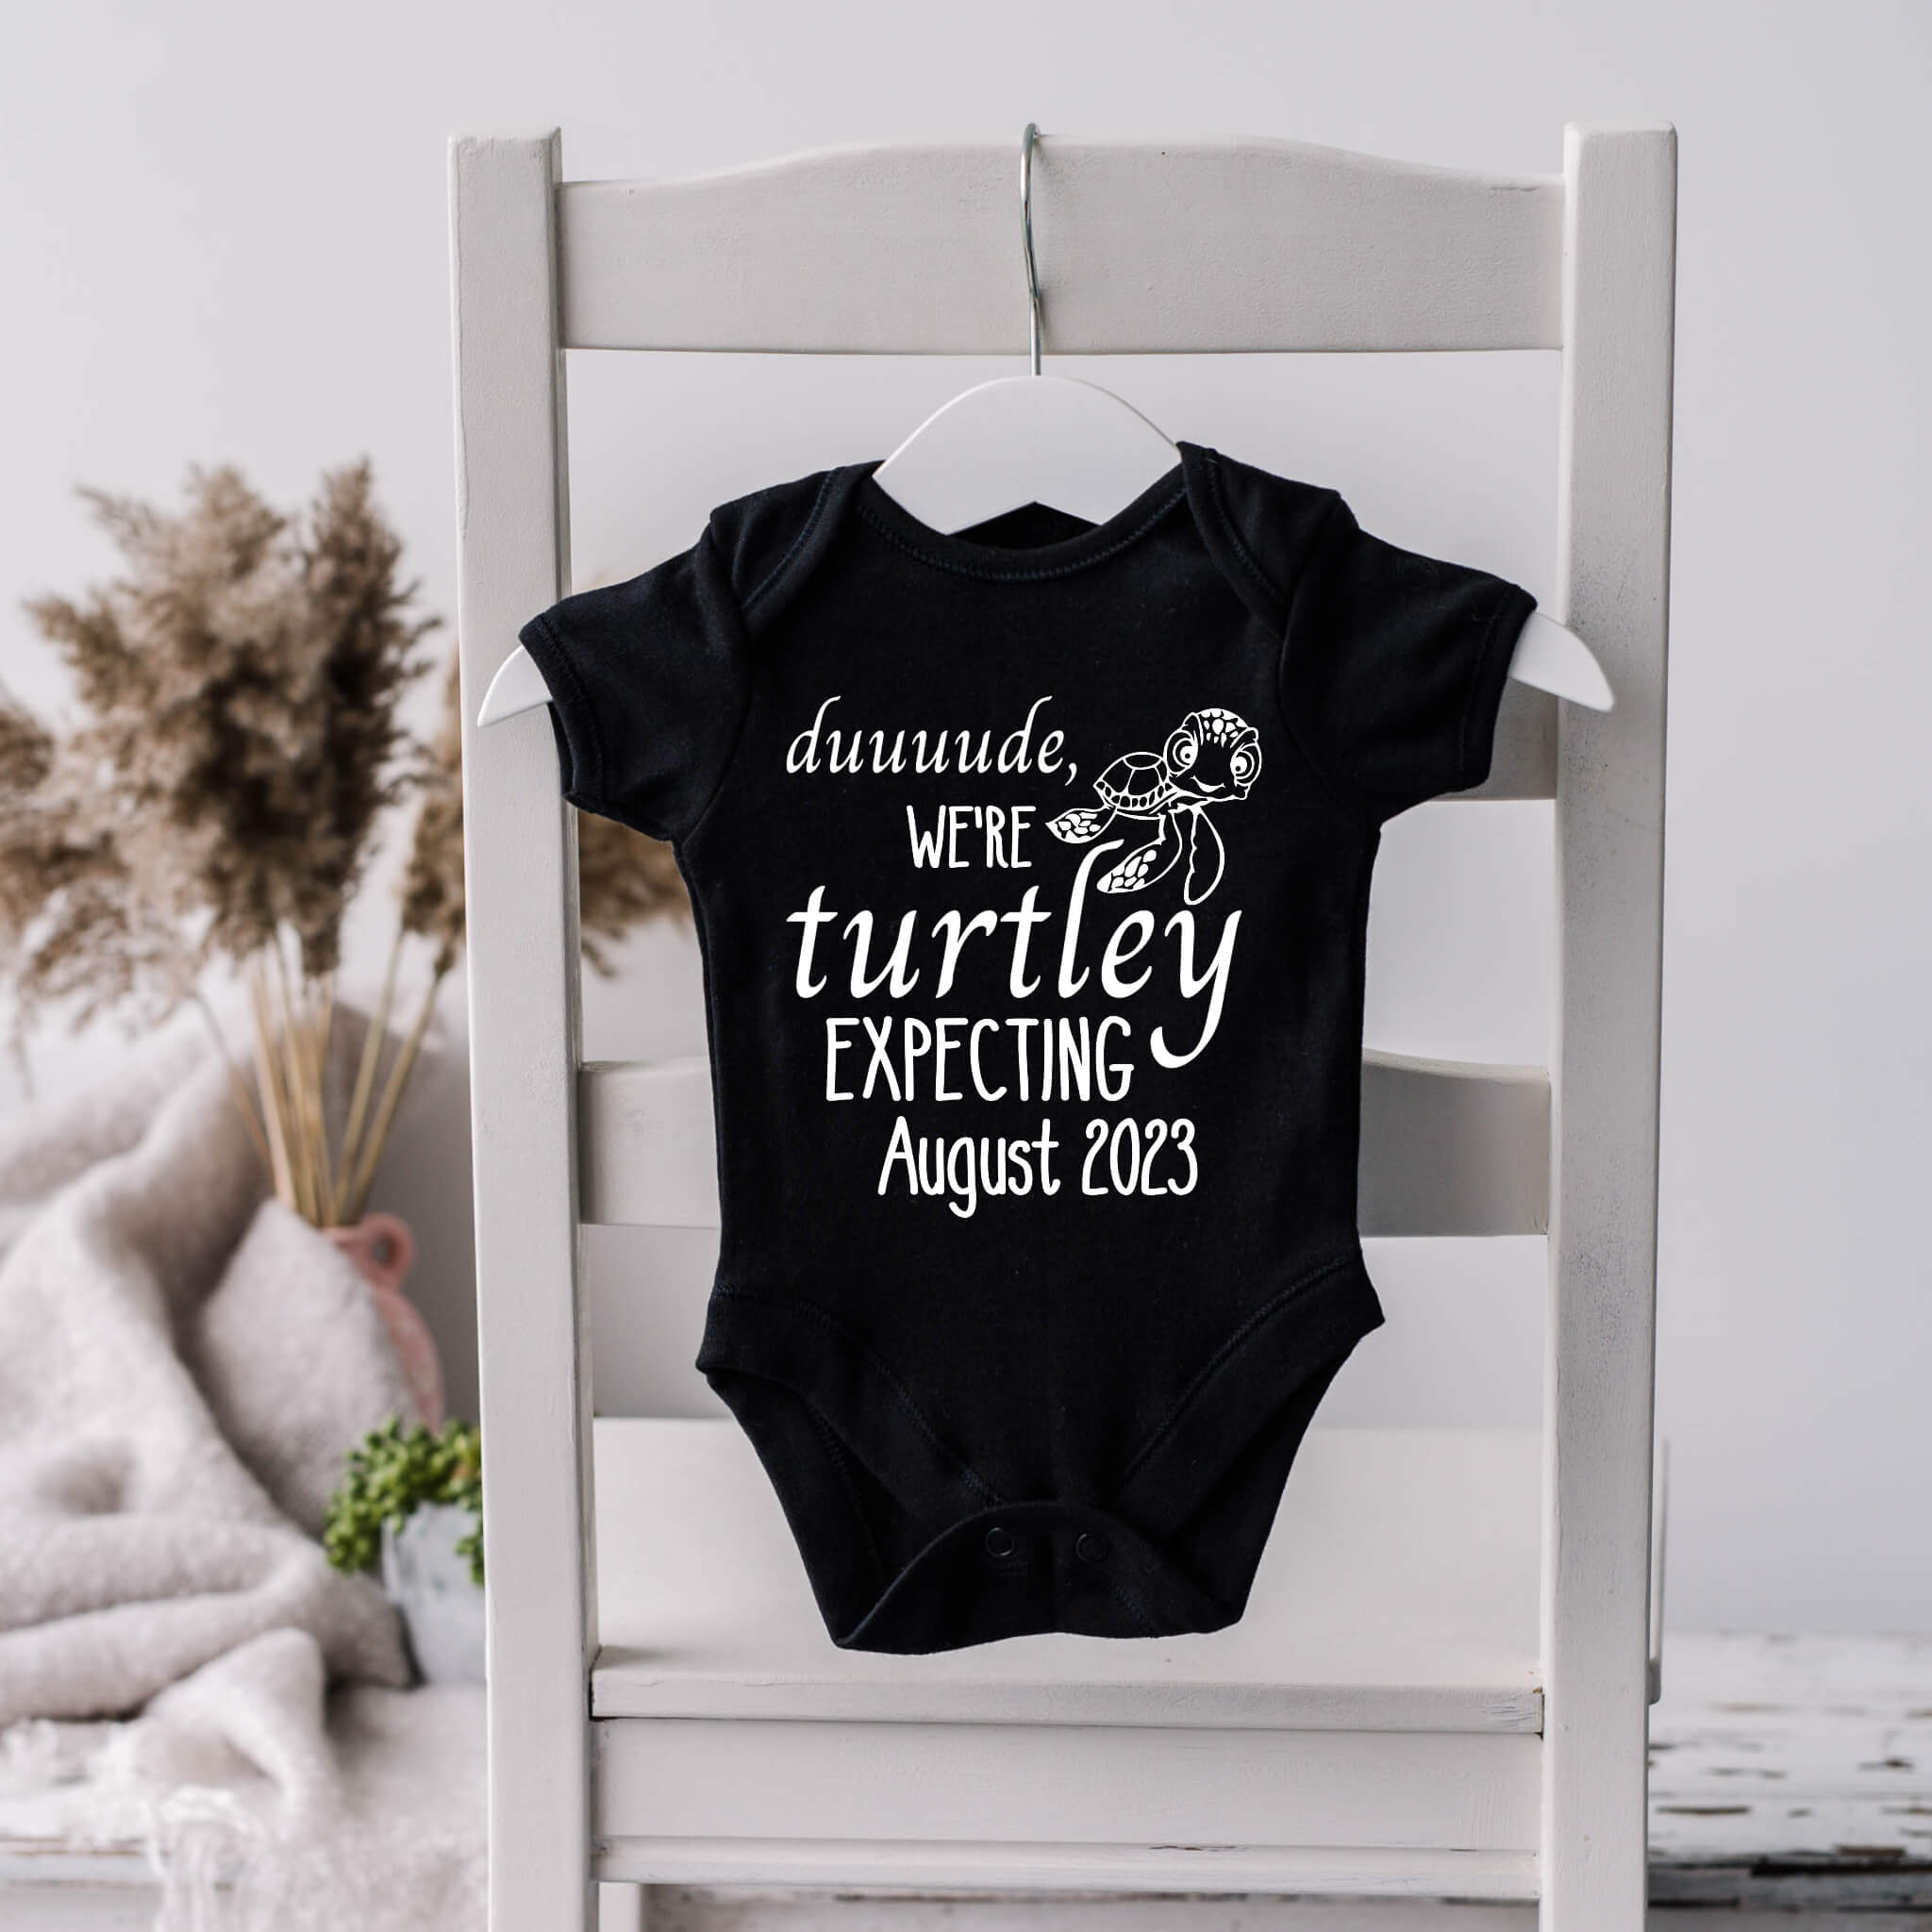 Personalized Pregnancy Announcement, Finding Nemo Themed, Dude We’re Turtley Expecting, Customized Baby Announcement Onesie, Social Media Announcement, Gift Box Baby Announcement